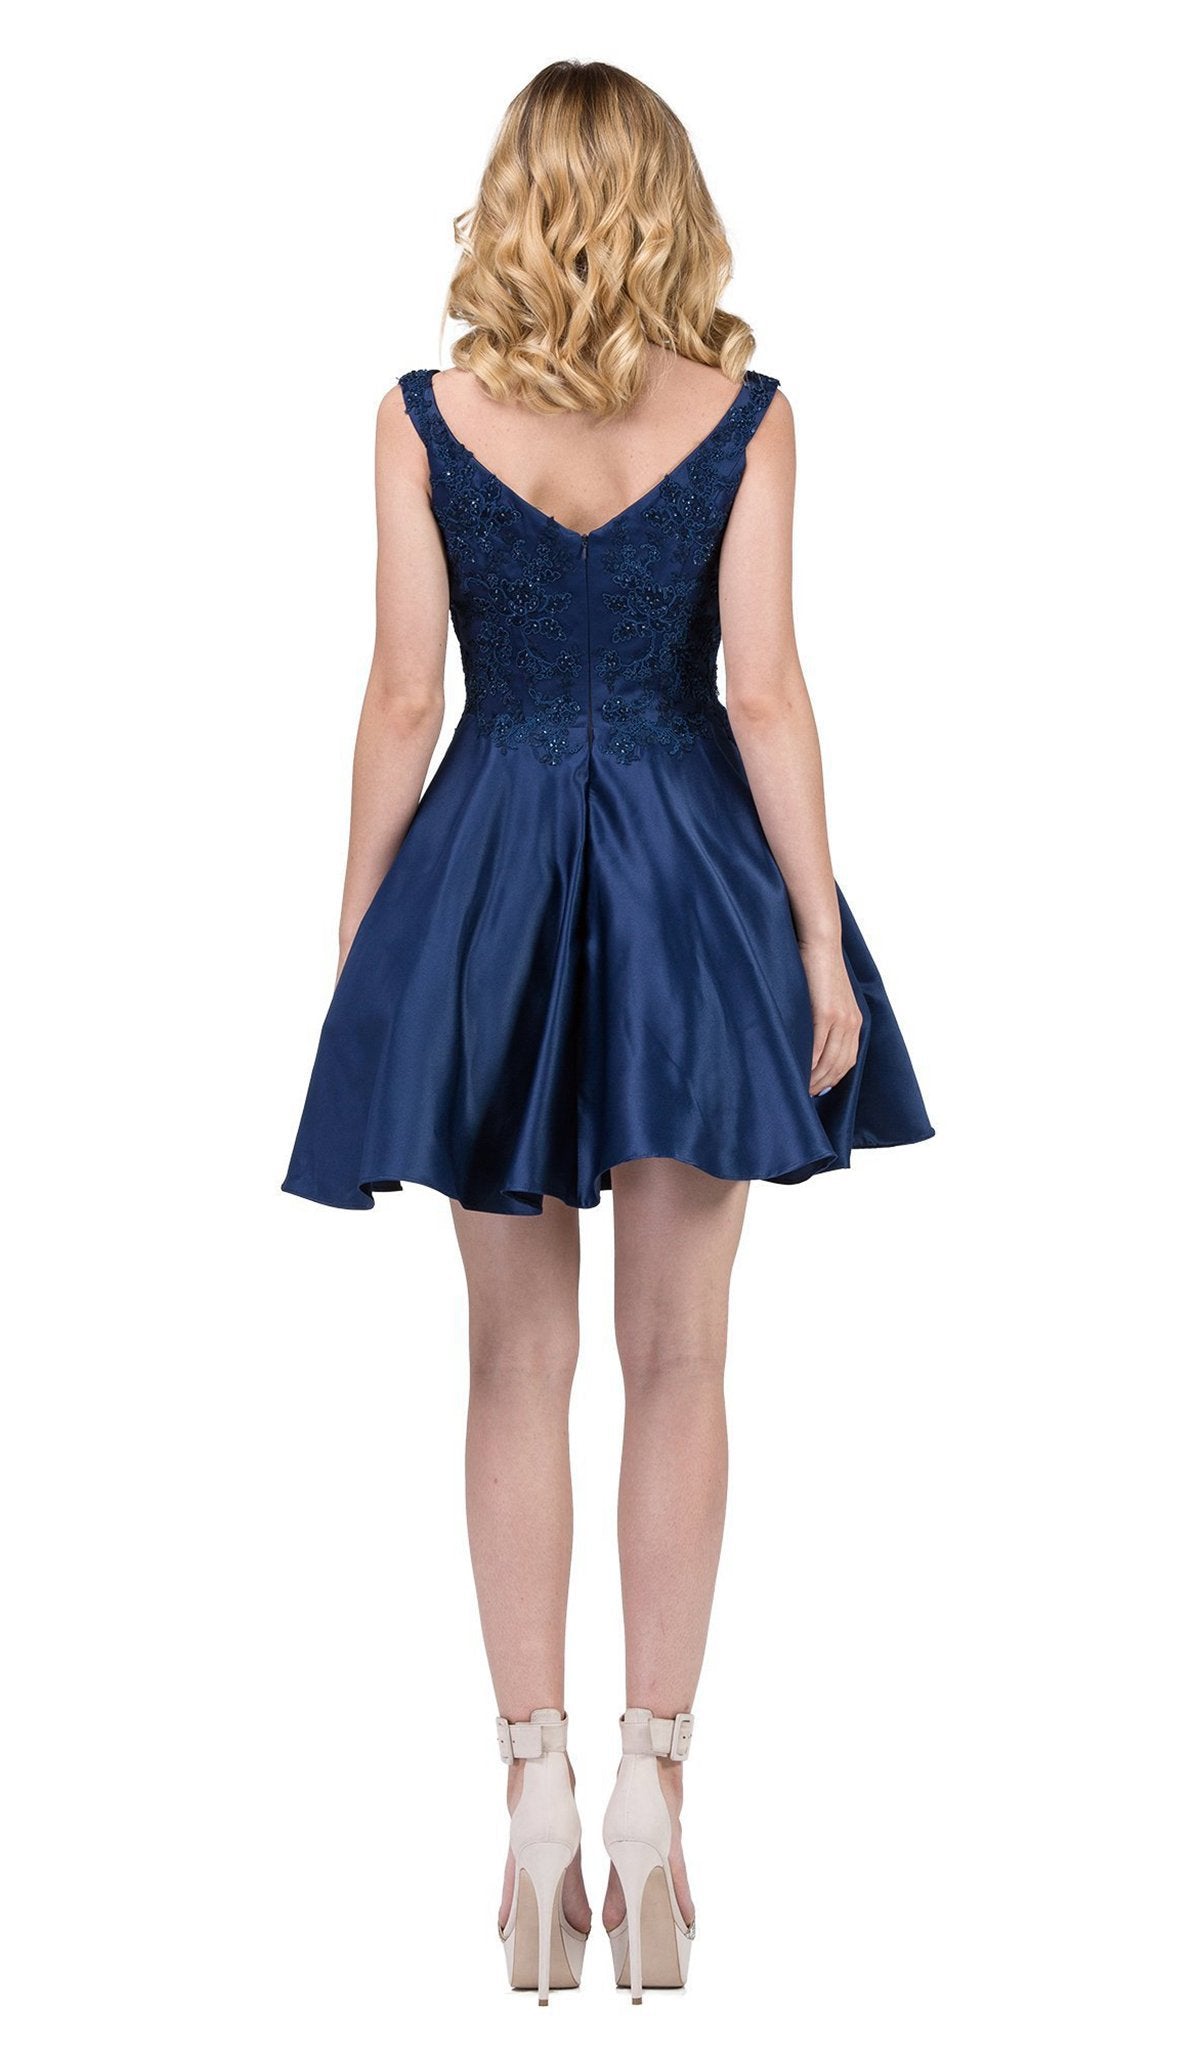 Dancing Queen - 3057 Beaded Lace Sweetheart A-line Homecoming Dress In Blue